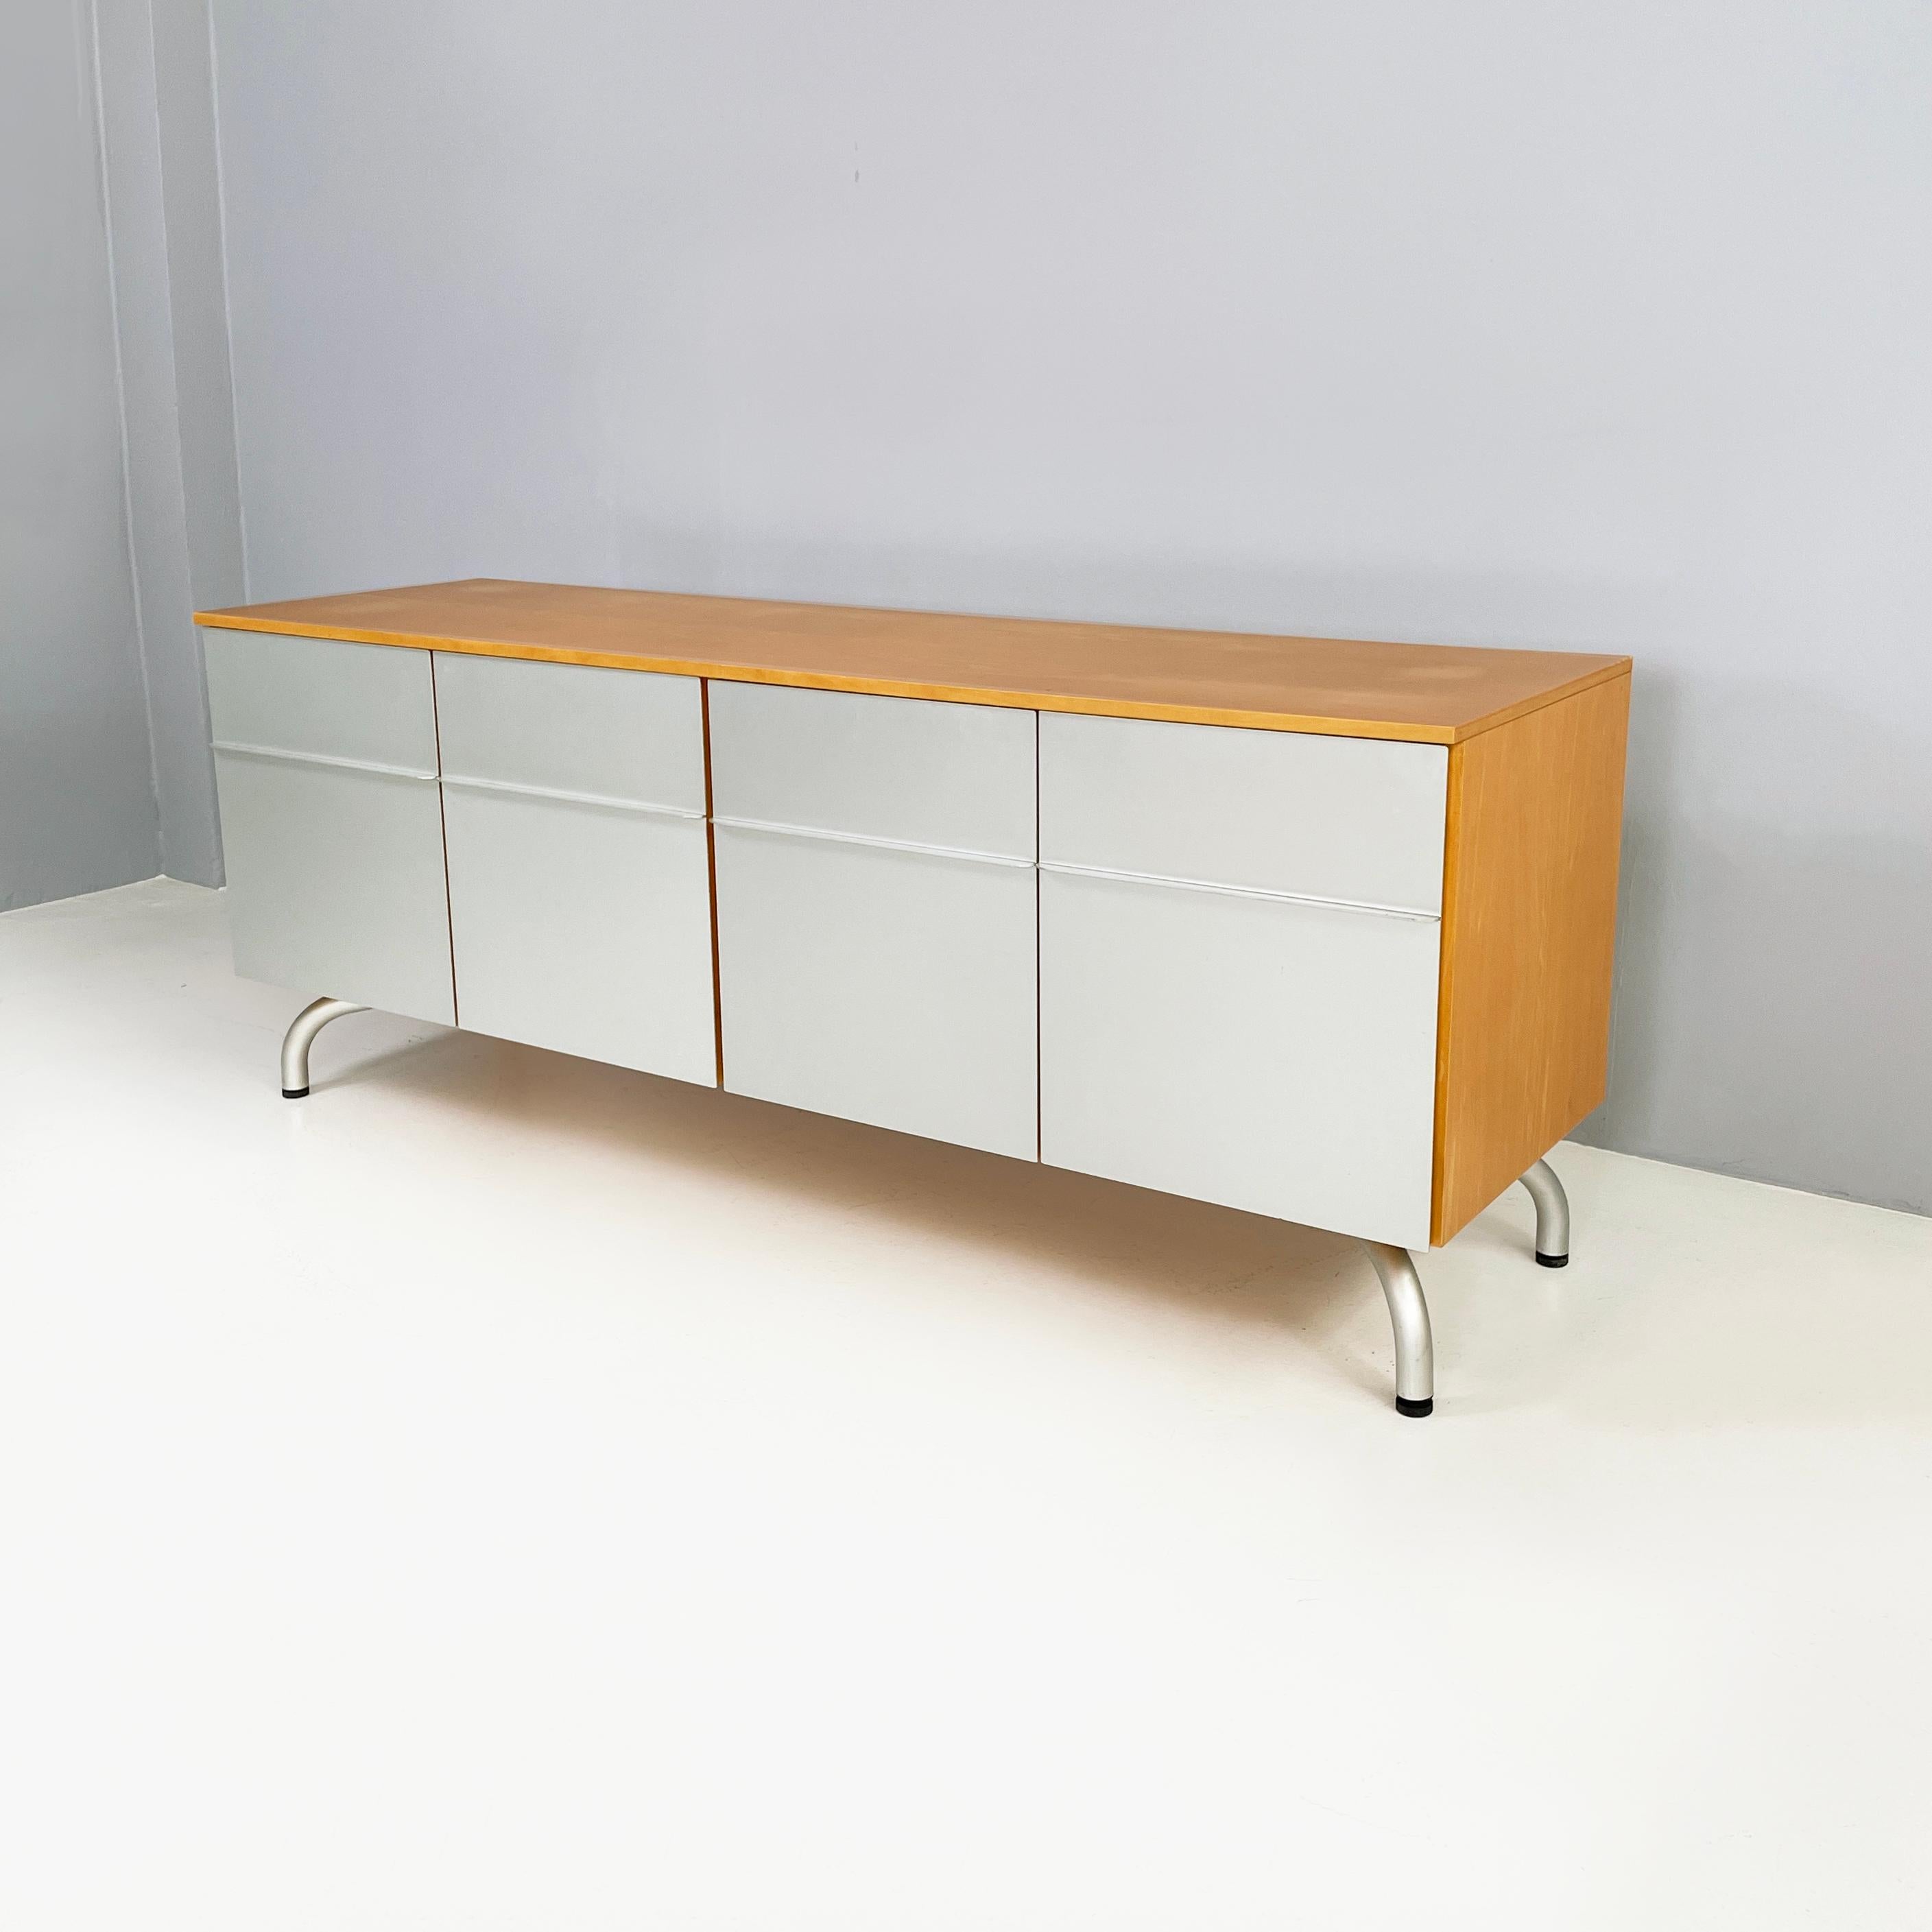 Italian modern wood and metal sideboard by Vico Magistretti for De Padova, 1980s
Rectangular base sideboard with wooden structure. On the front it features a pair of double metal doors. In each compartment there is a wooden shelf. Round metal legs